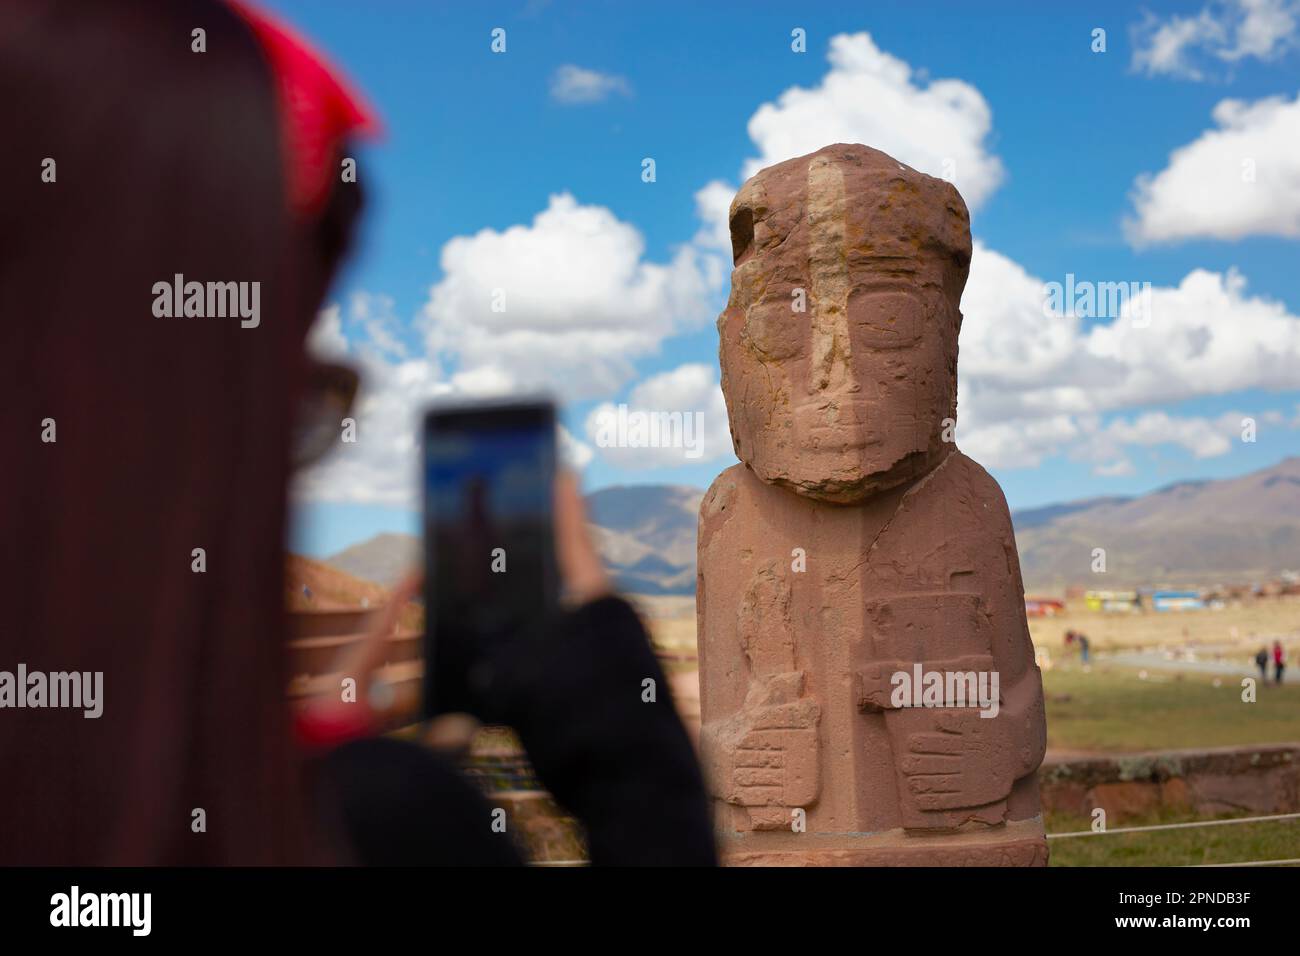 A tourist taking a photo with a smartphone to a monolith in Tiwanaku, a pre-Columbian archaeological site in western Bolivia. Stock Photo